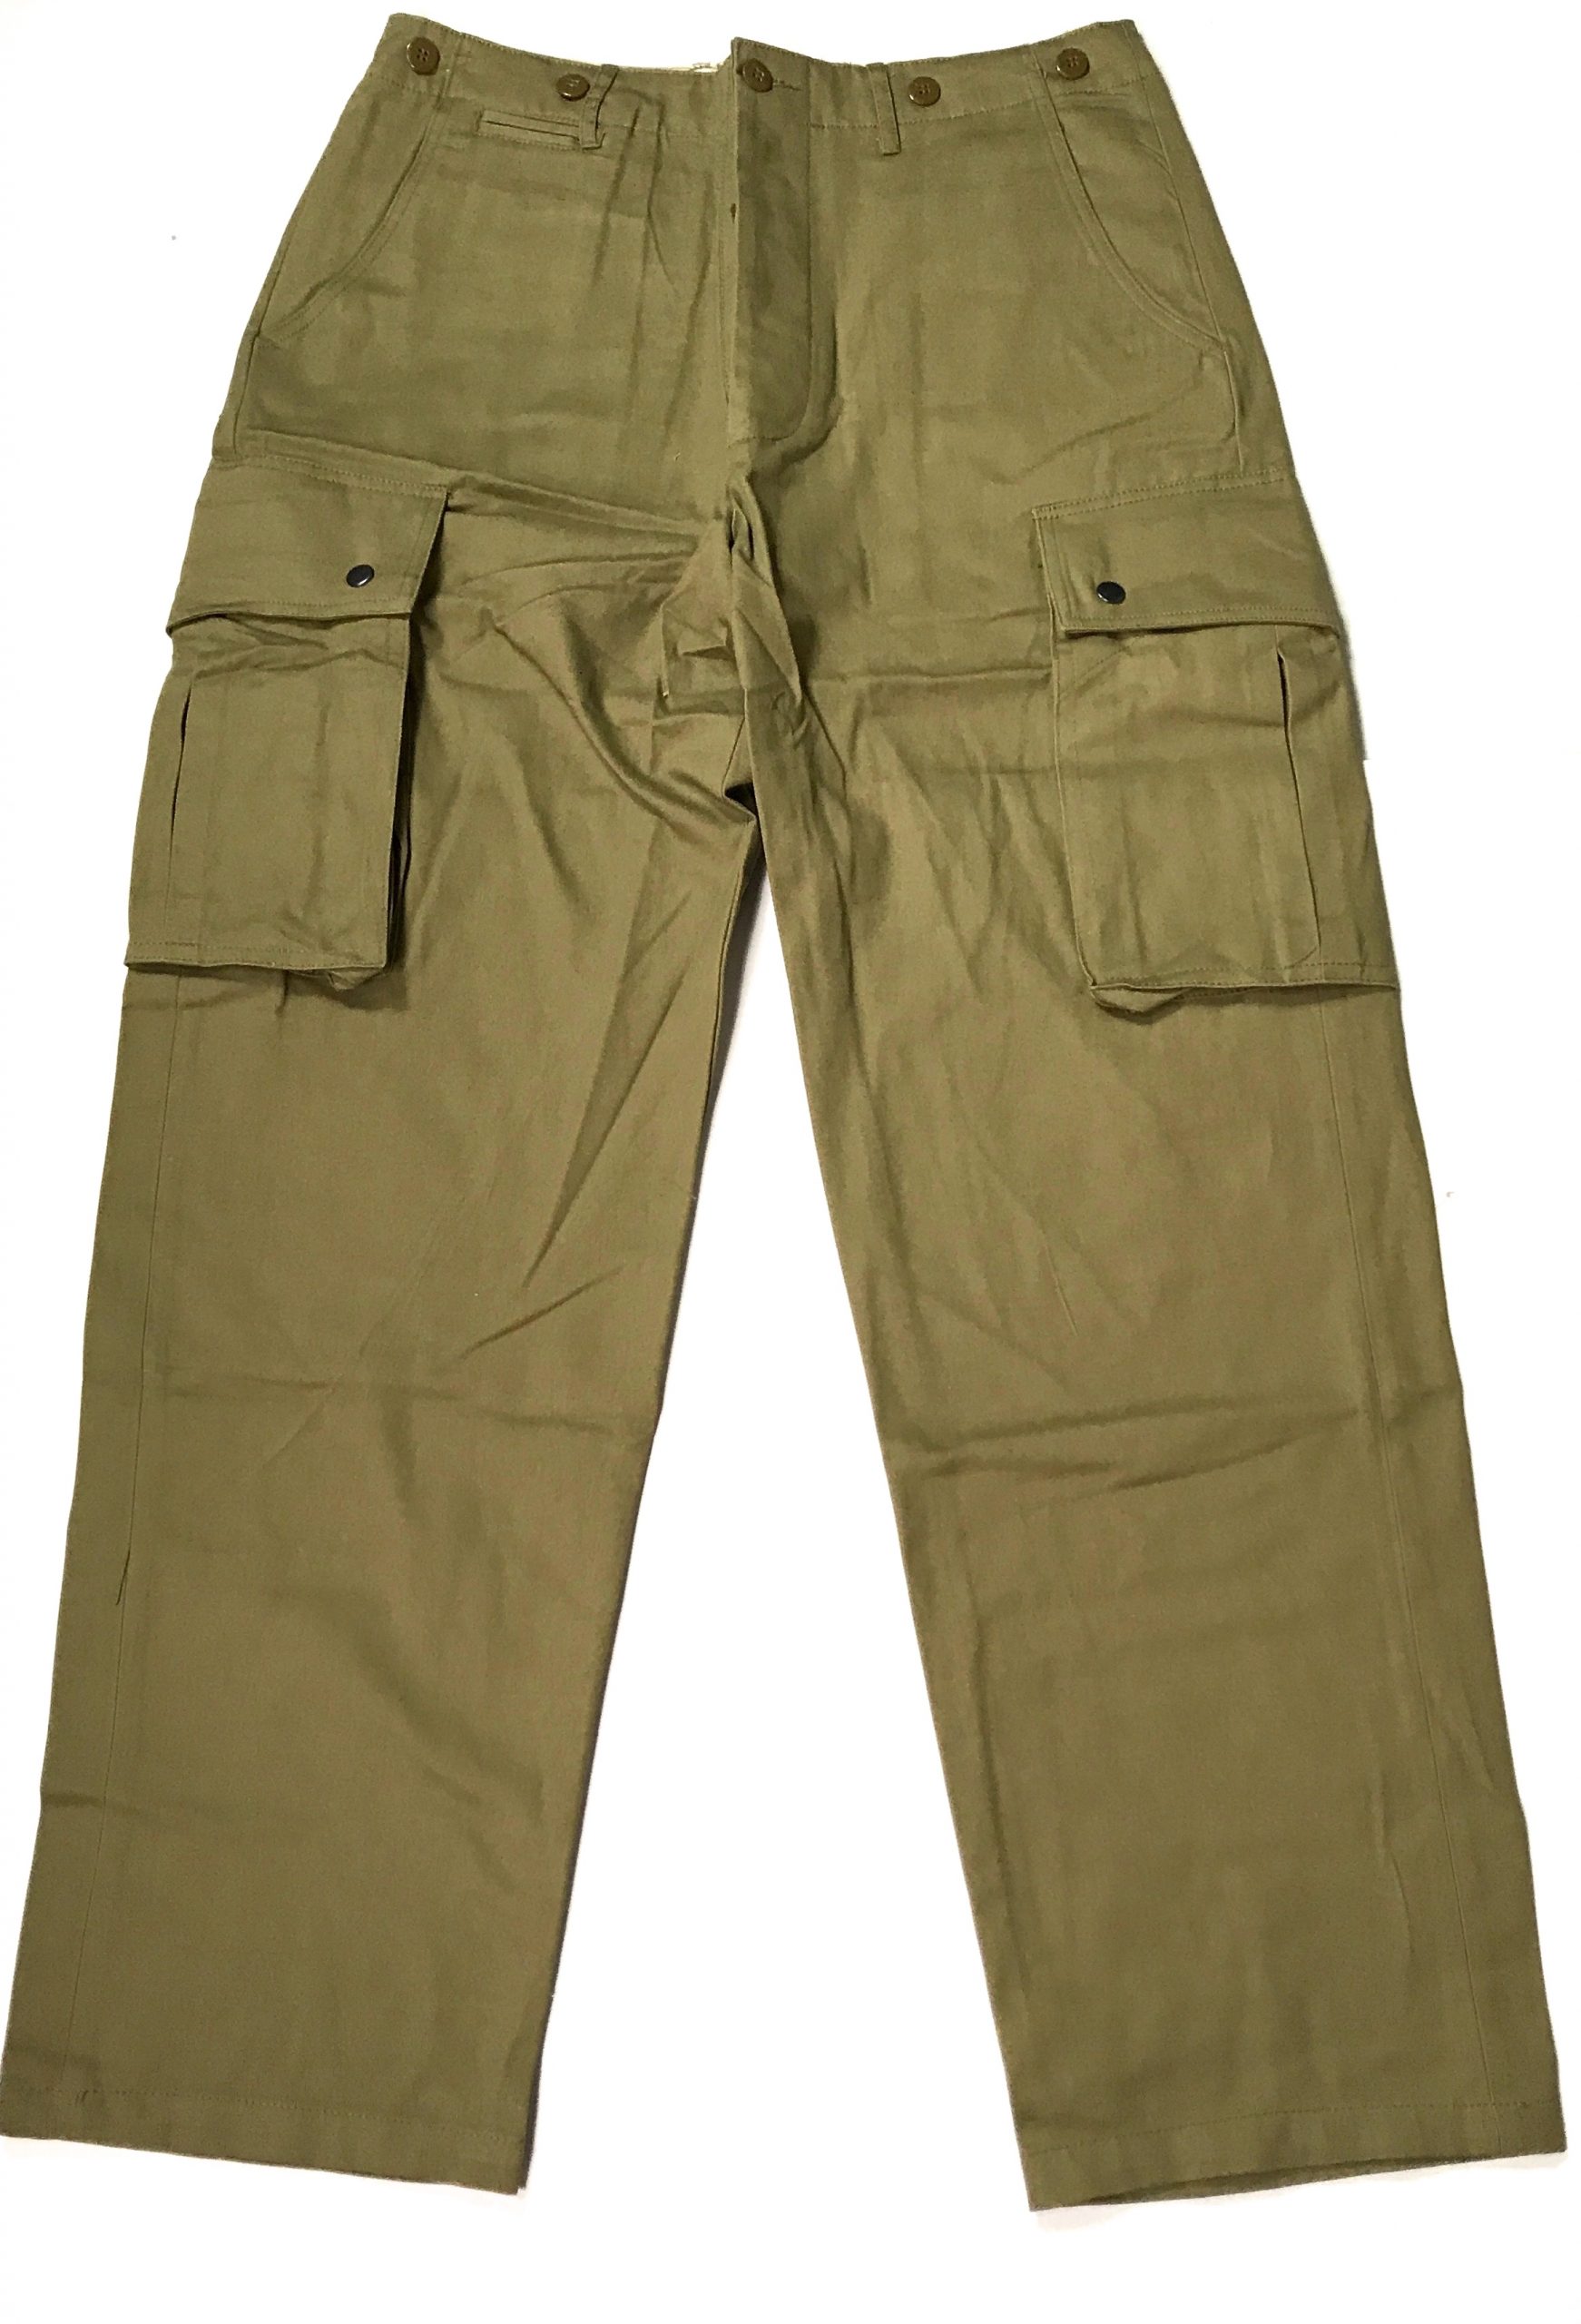 M1942 STANDARD AIRBORNE JUMP TROUSERS | Man The Line